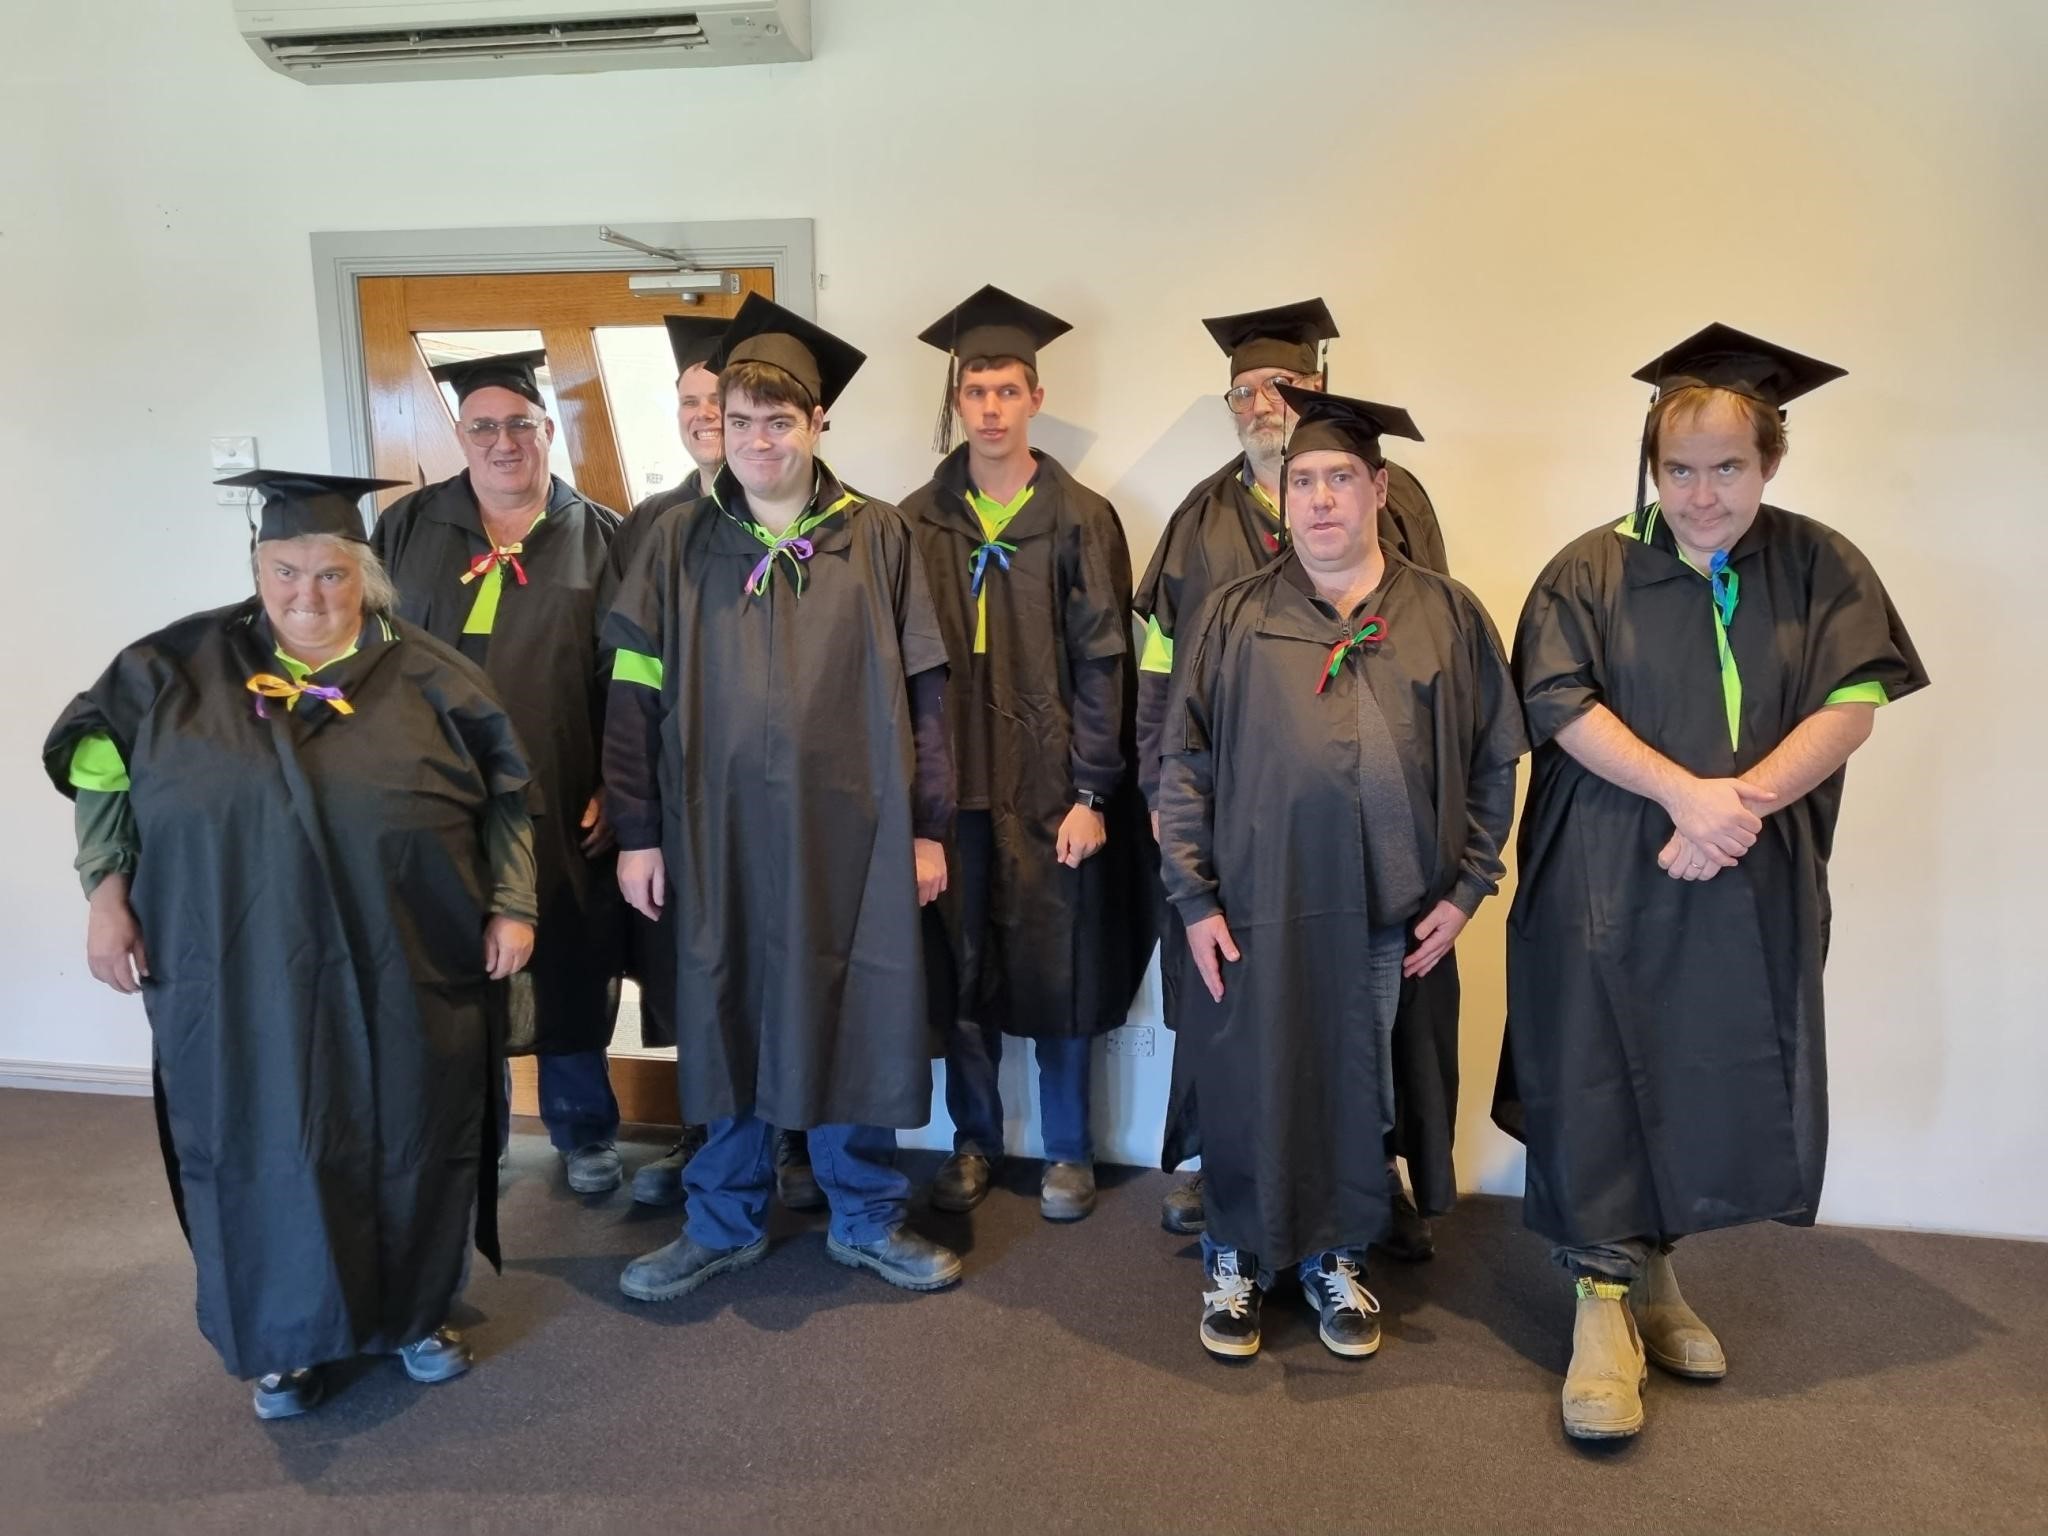 Merriwa celebrated the graduation of their second group of employees